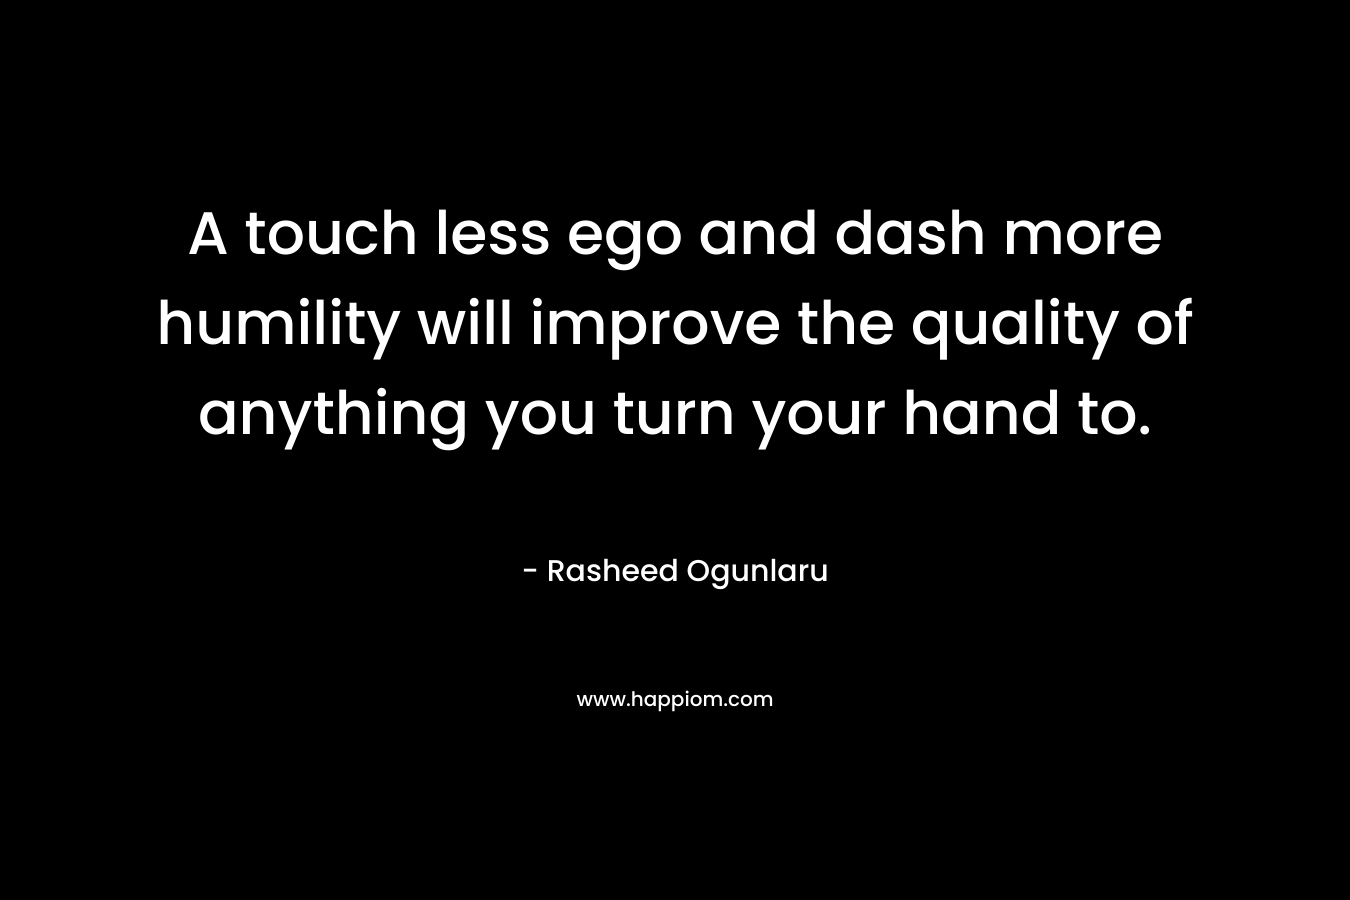 A touch less ego and dash more humility will improve the quality of anything you turn your hand to.